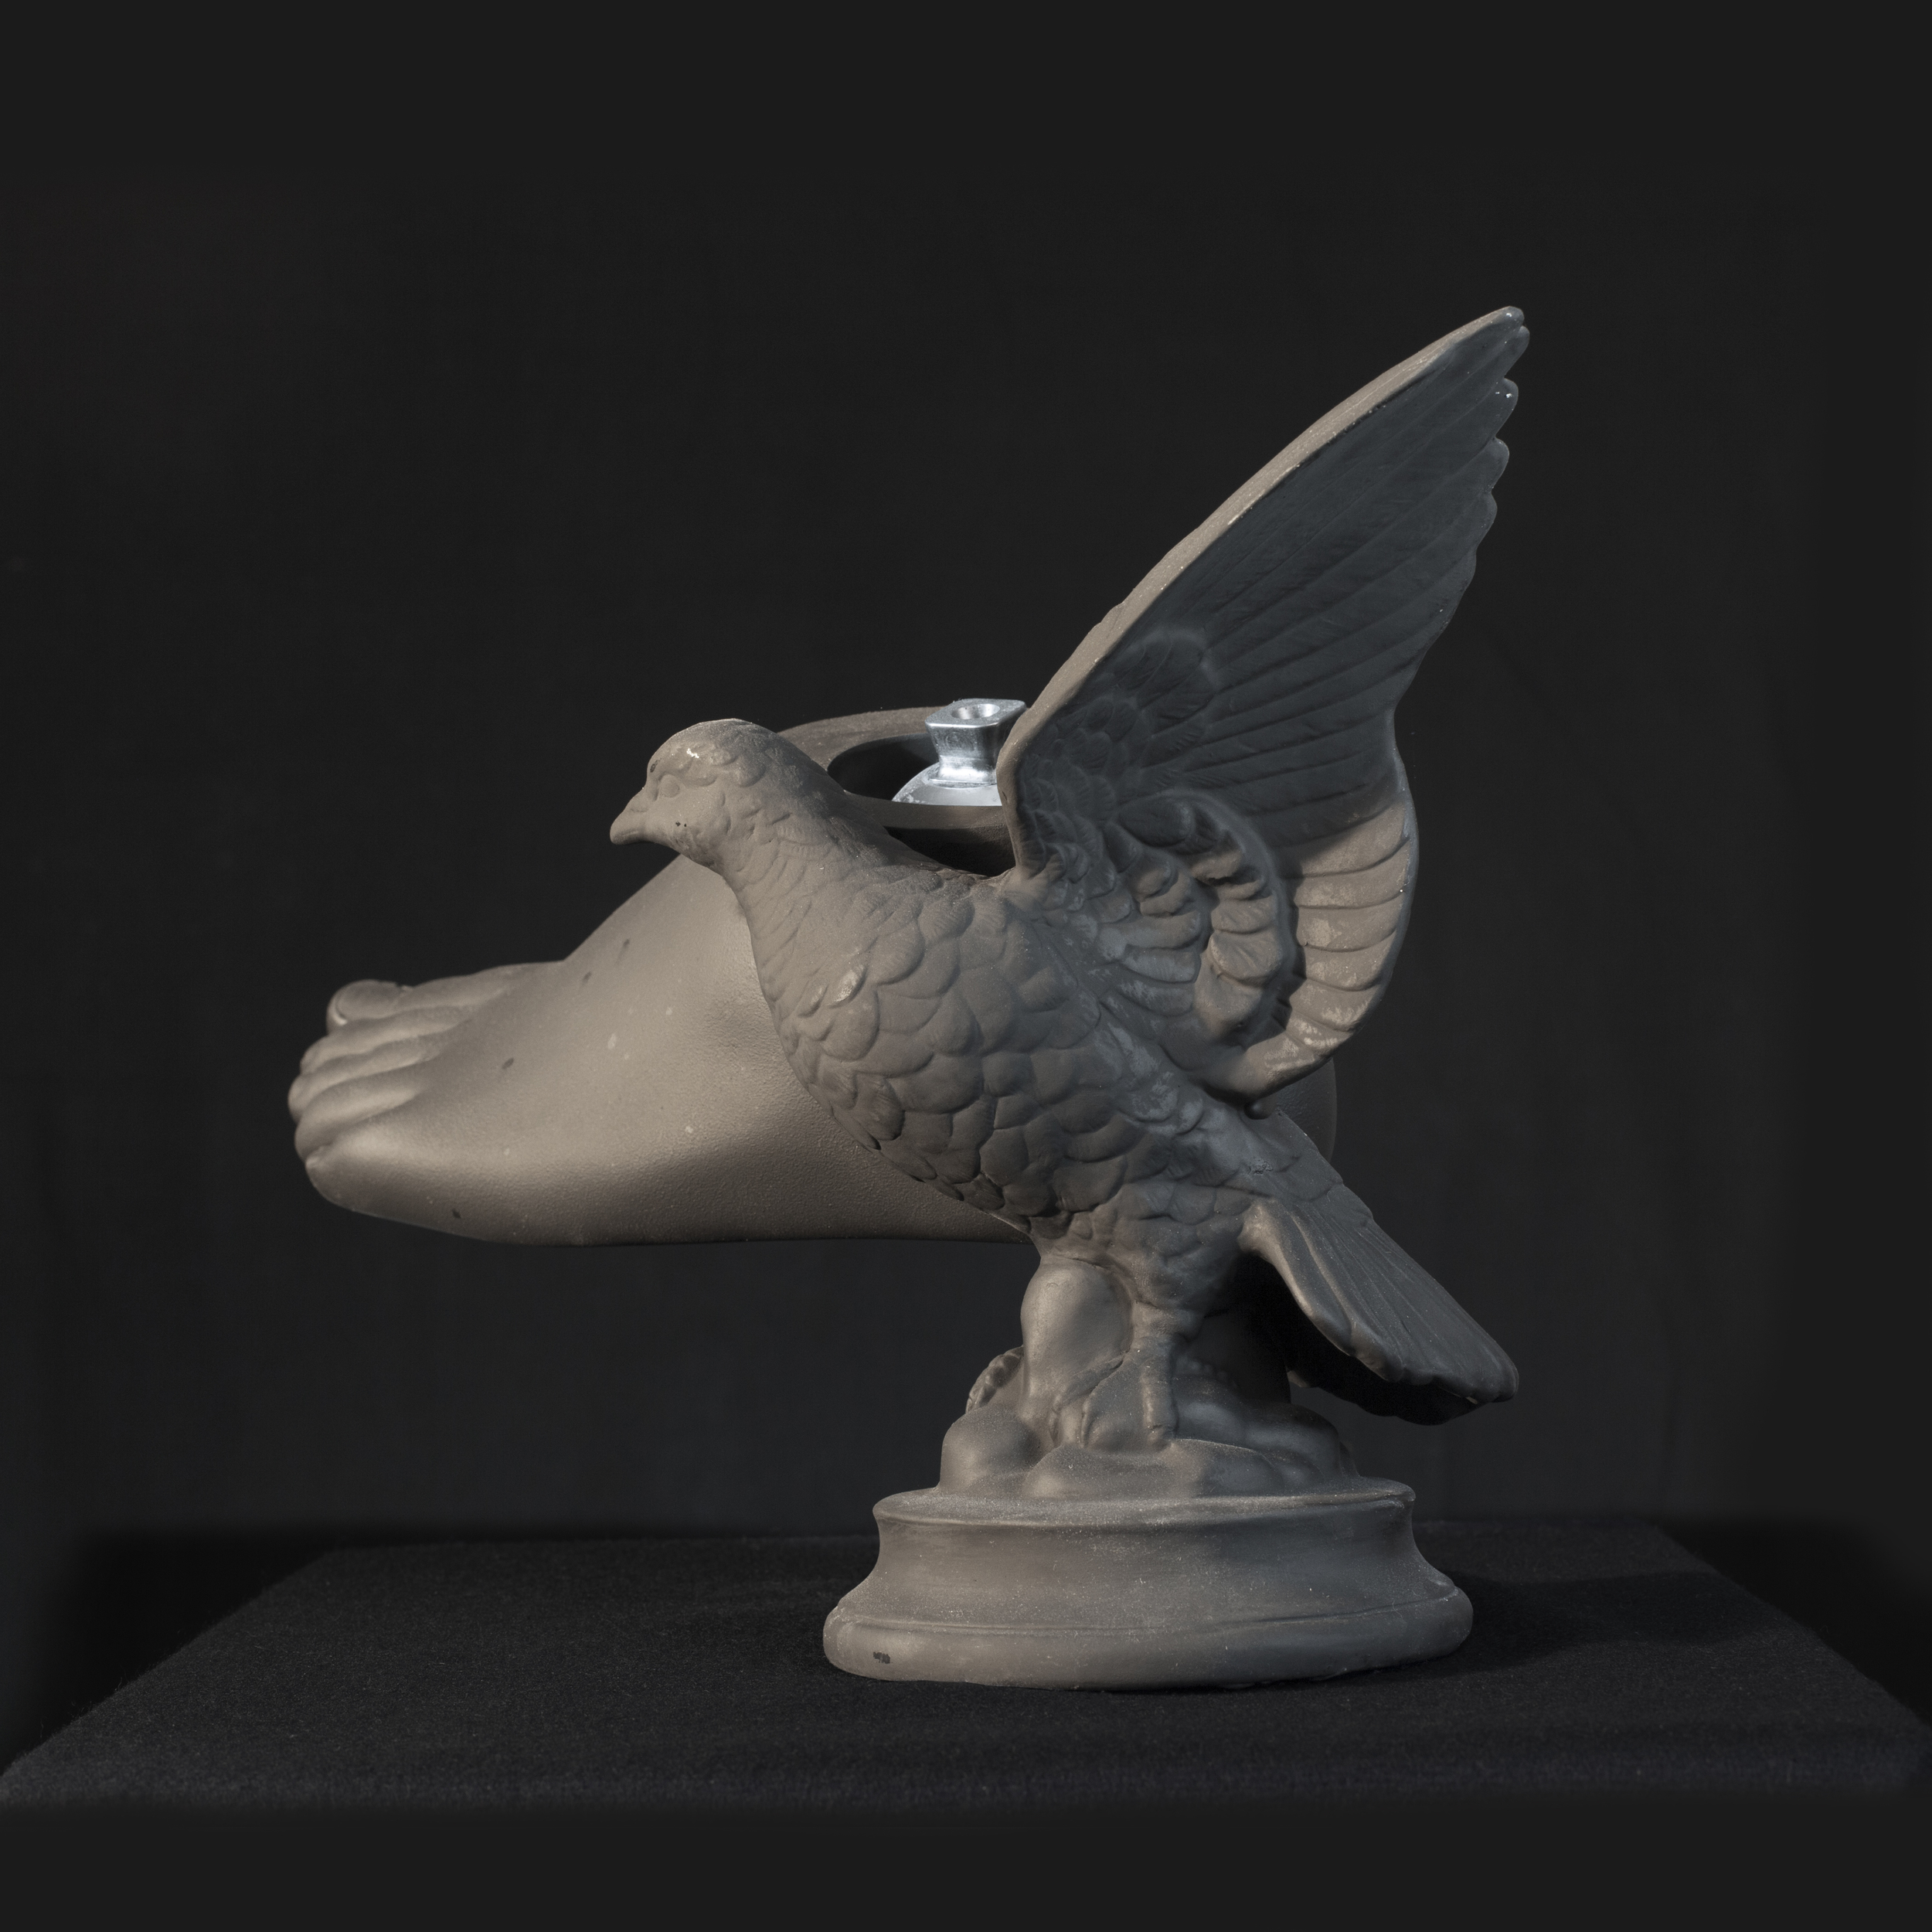 Achilles’ Dove, 2014, painted chalkware and articulated prosthetic, 10x13x6 inches